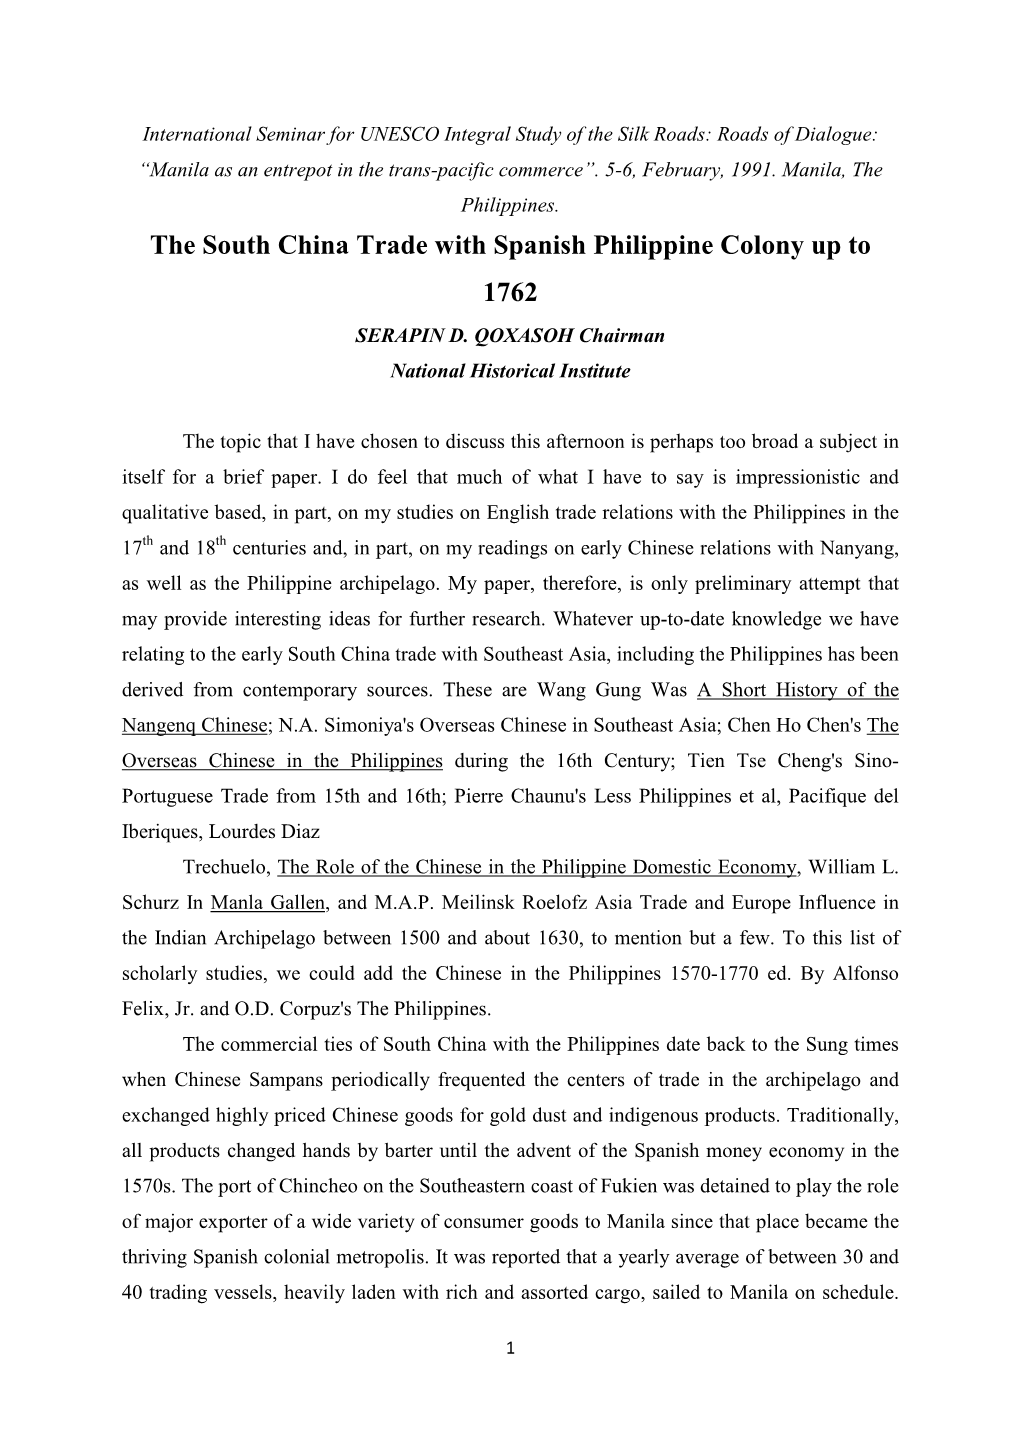 The South China Trade with Spanish Philippine Colony up to 1762 SERAPIN D